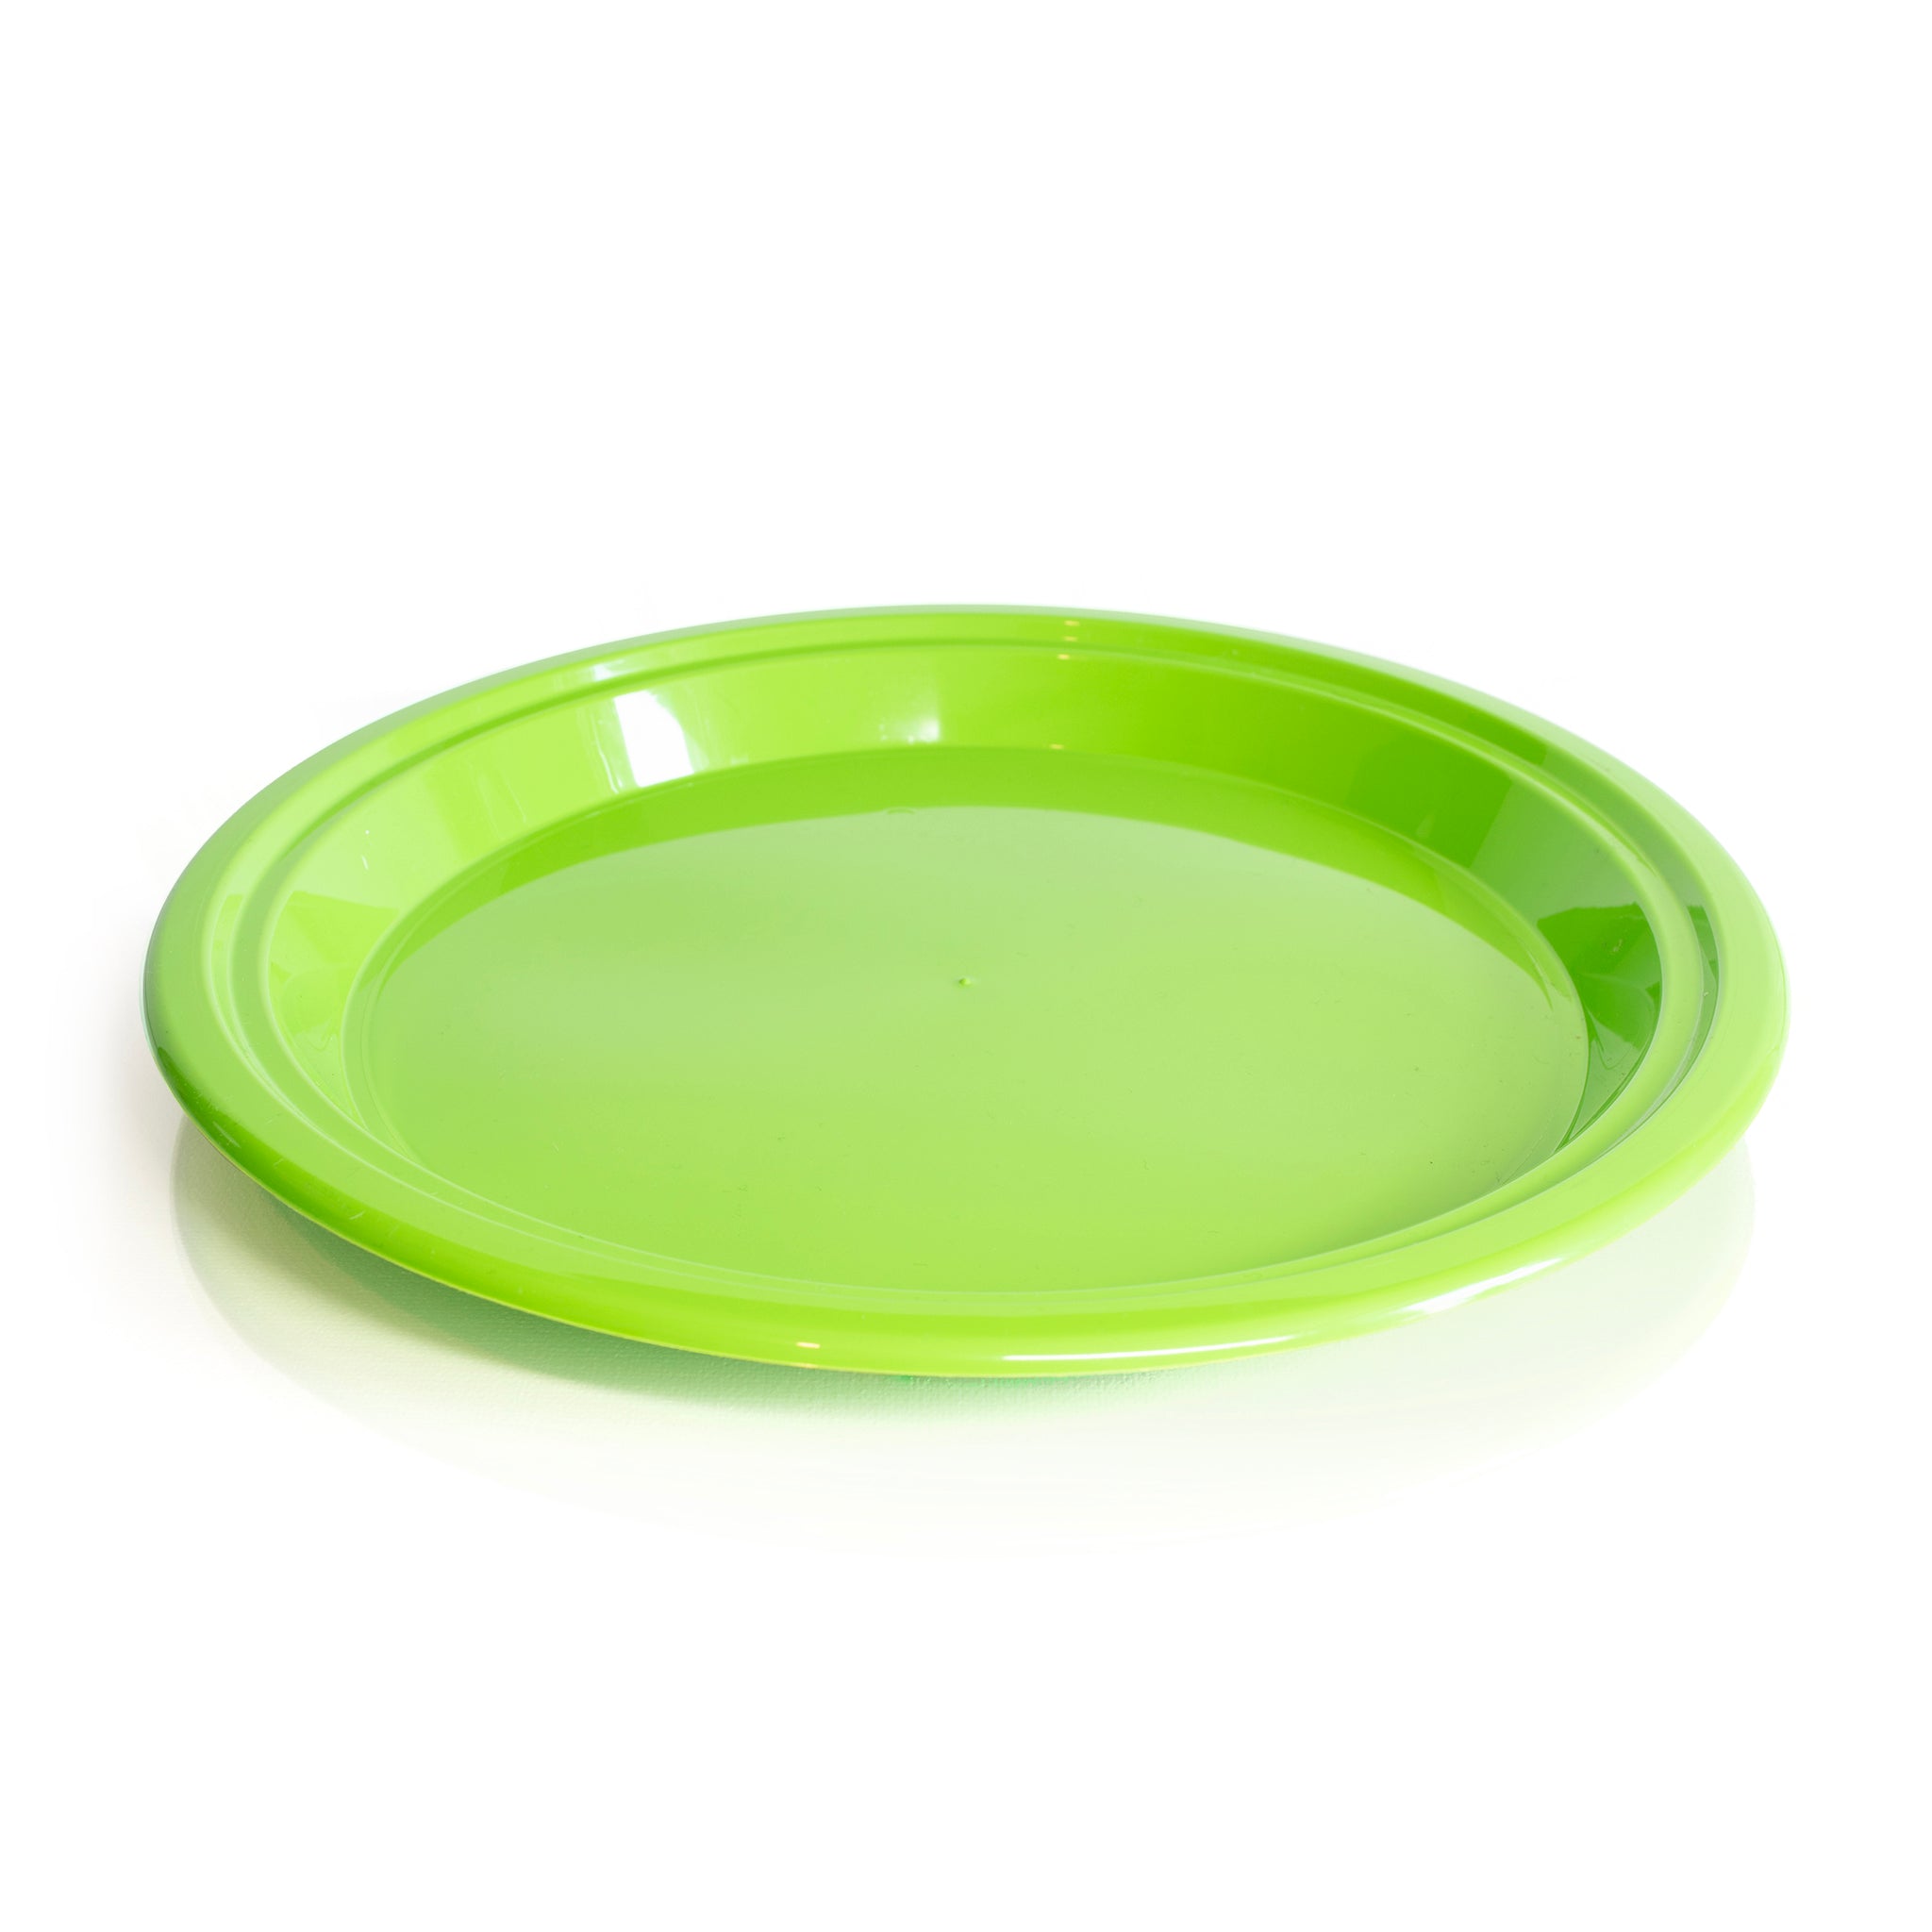 Recycled plastic green plate 